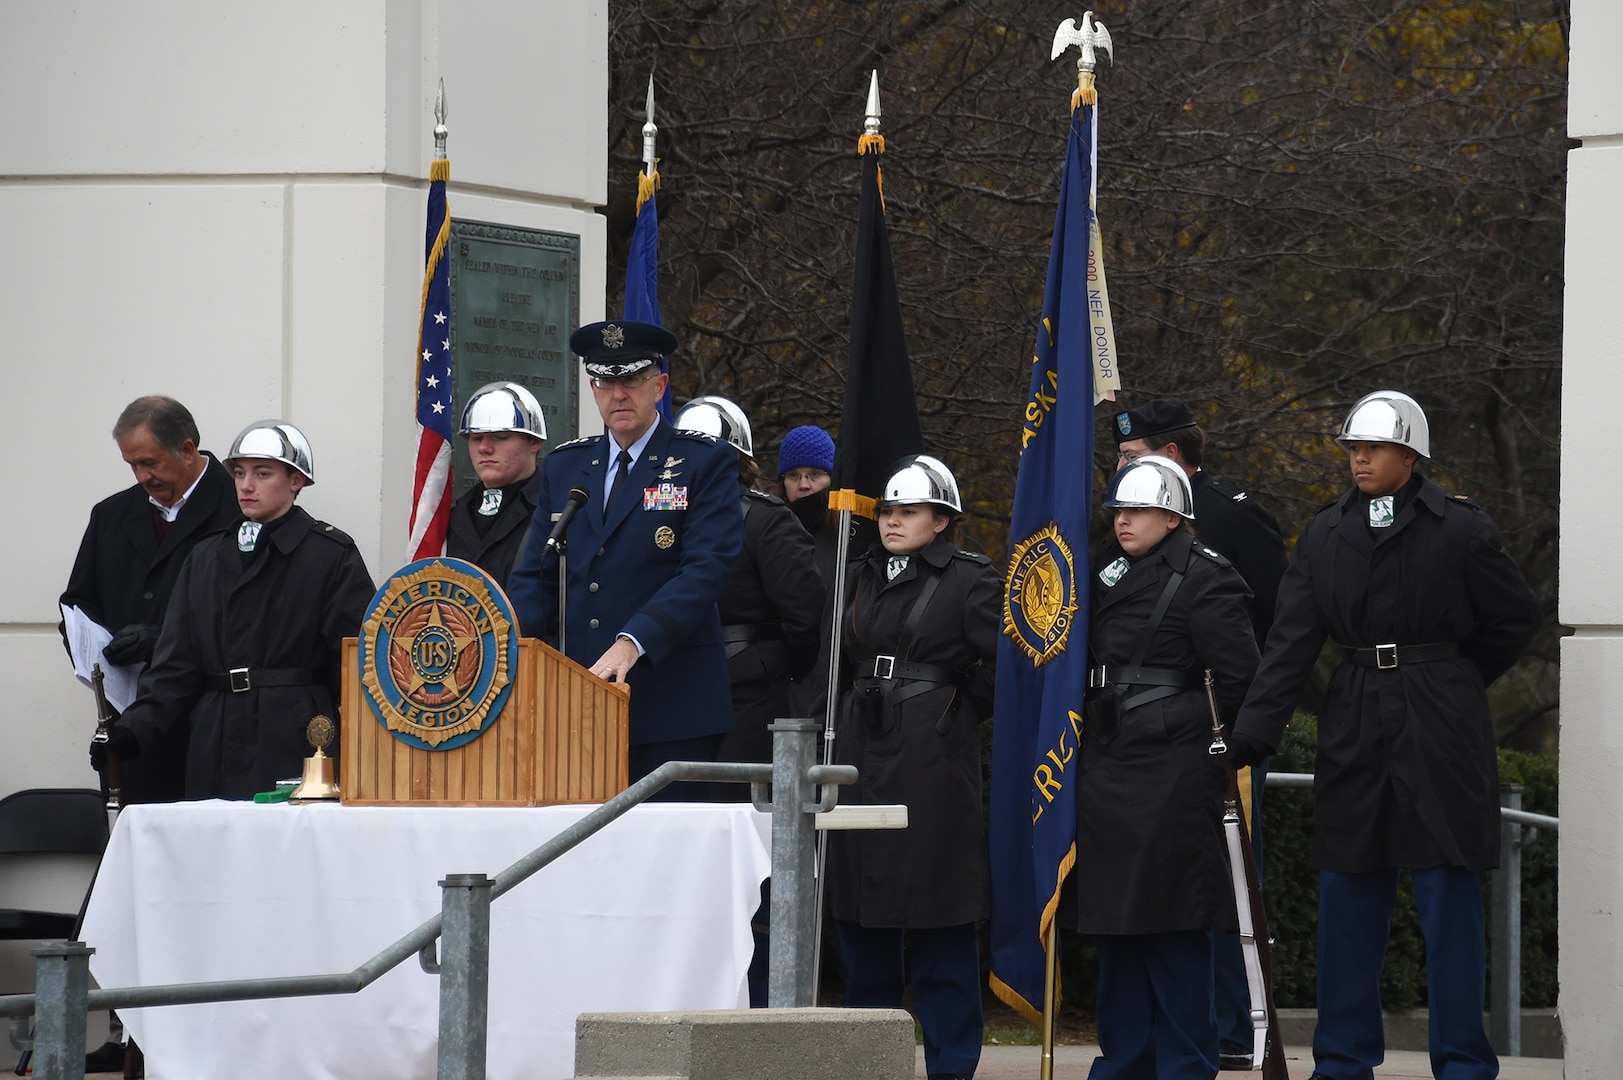 U.S. Air Force Gen. John Hyten, commander of U.S. Strategic Command, delivers remarks during a Veterans Day ceremony at Memorial Park in Omaha, Neb., Nov. 11, 2017. More than 200 people attended the ceremony to honor the service and sacrifice of American veterans and their families.